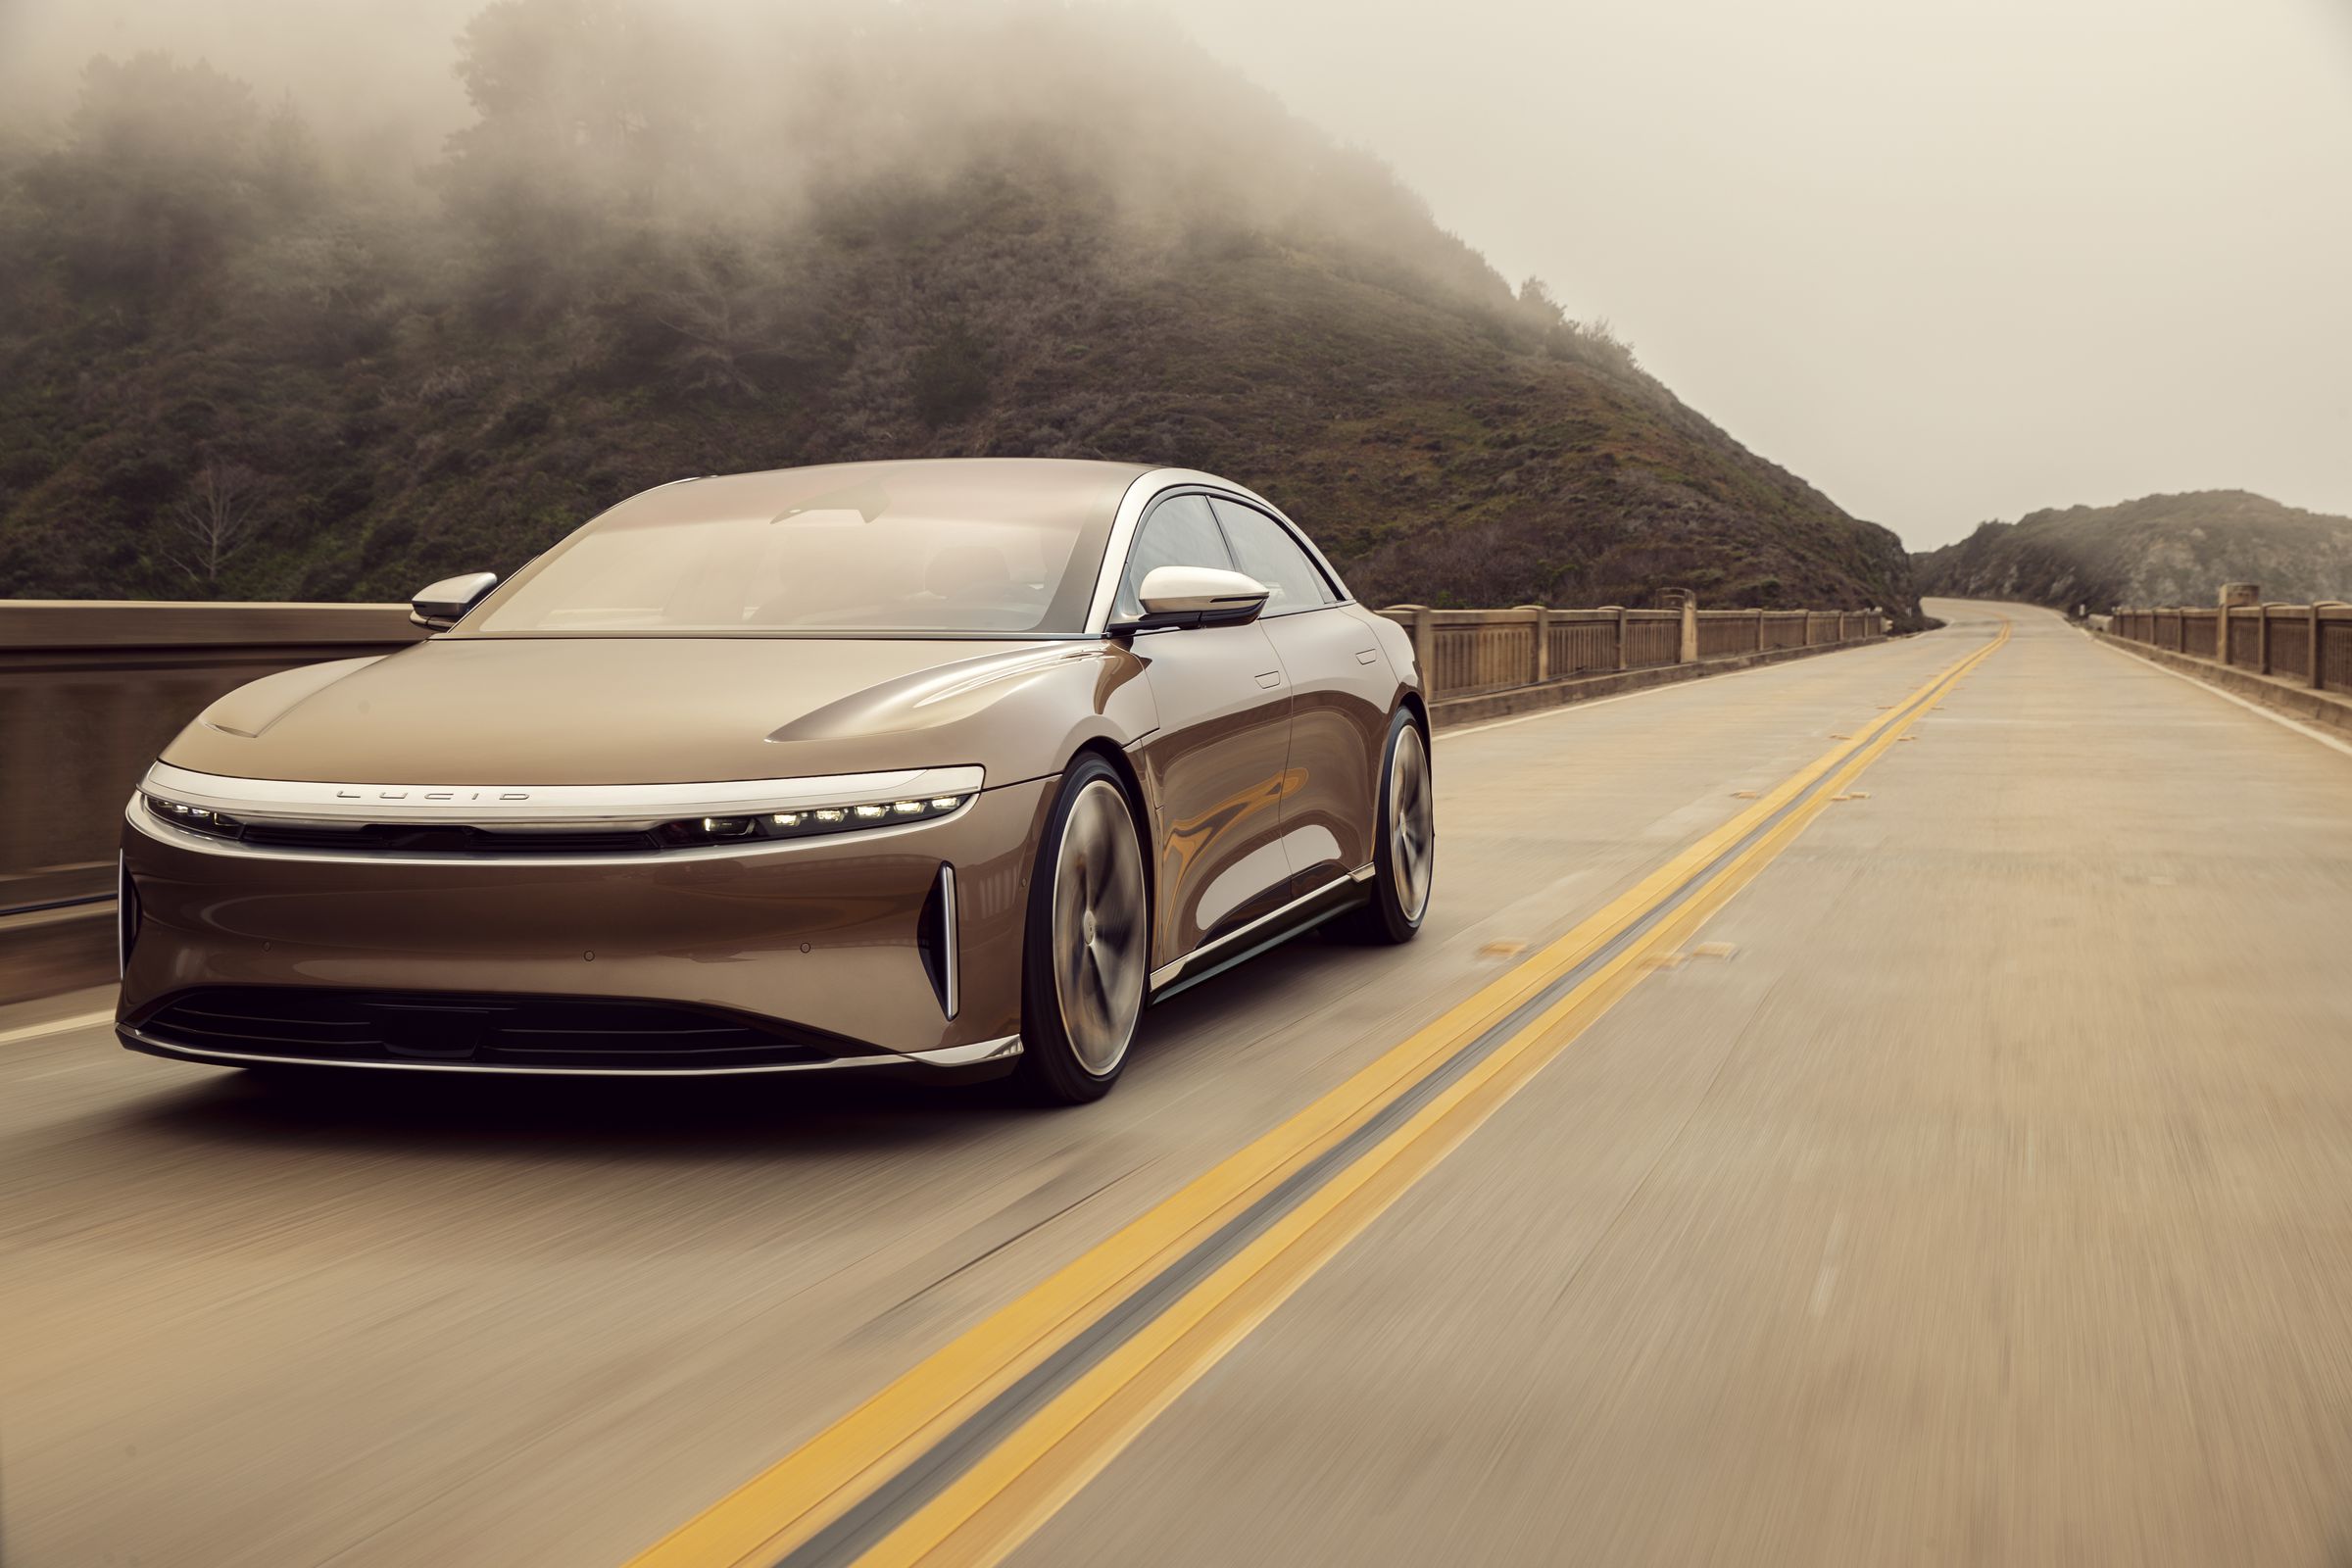 A picture of the Lucid Air driving on a two-lane road, pictured from the front in three-quarter view.